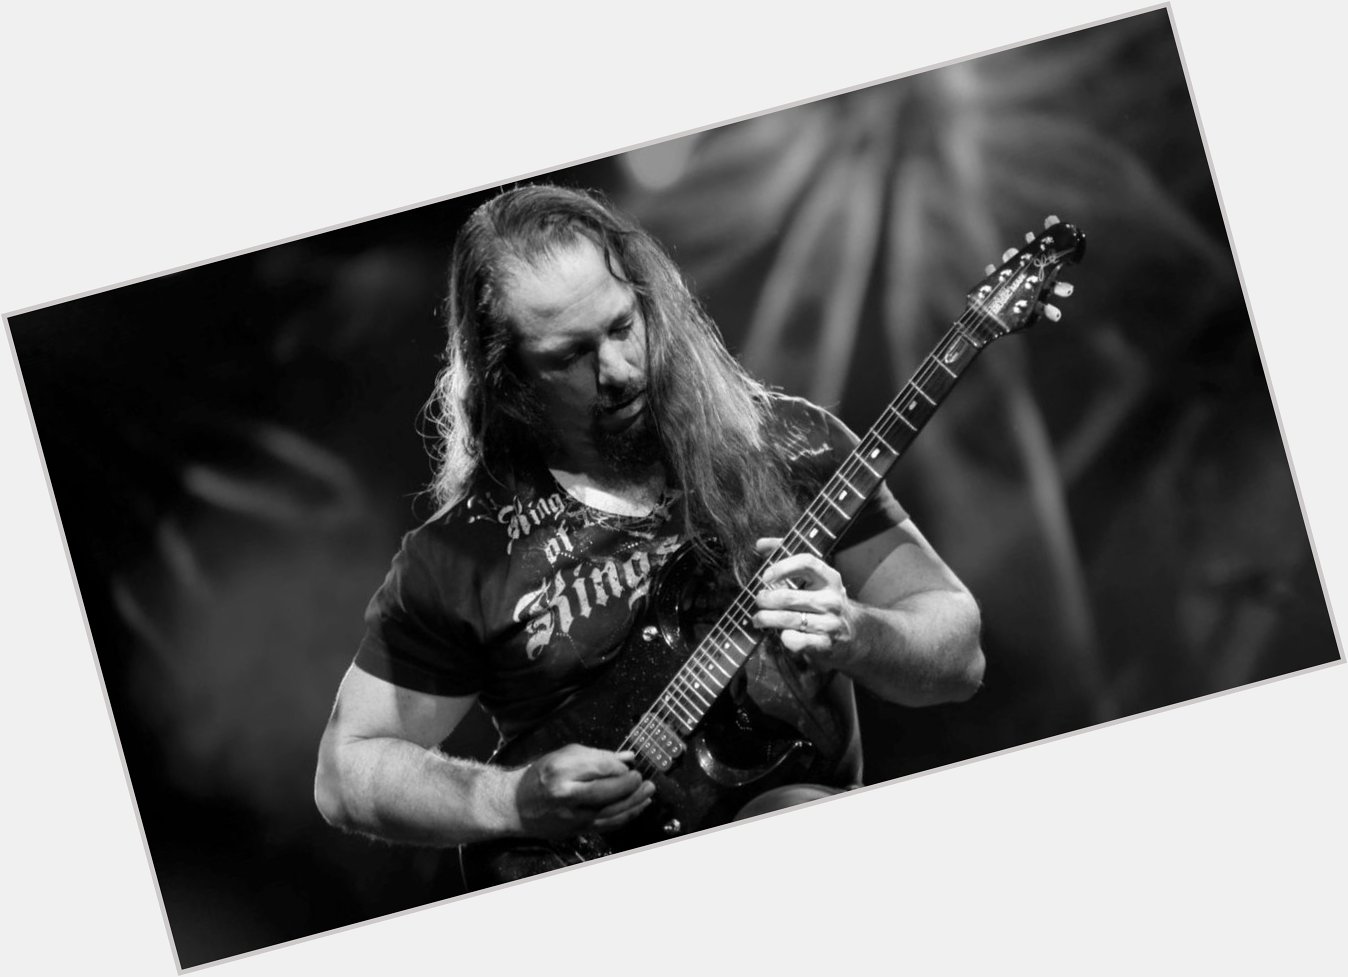 Happy birthday to John Petrucci, who is 50 today! 